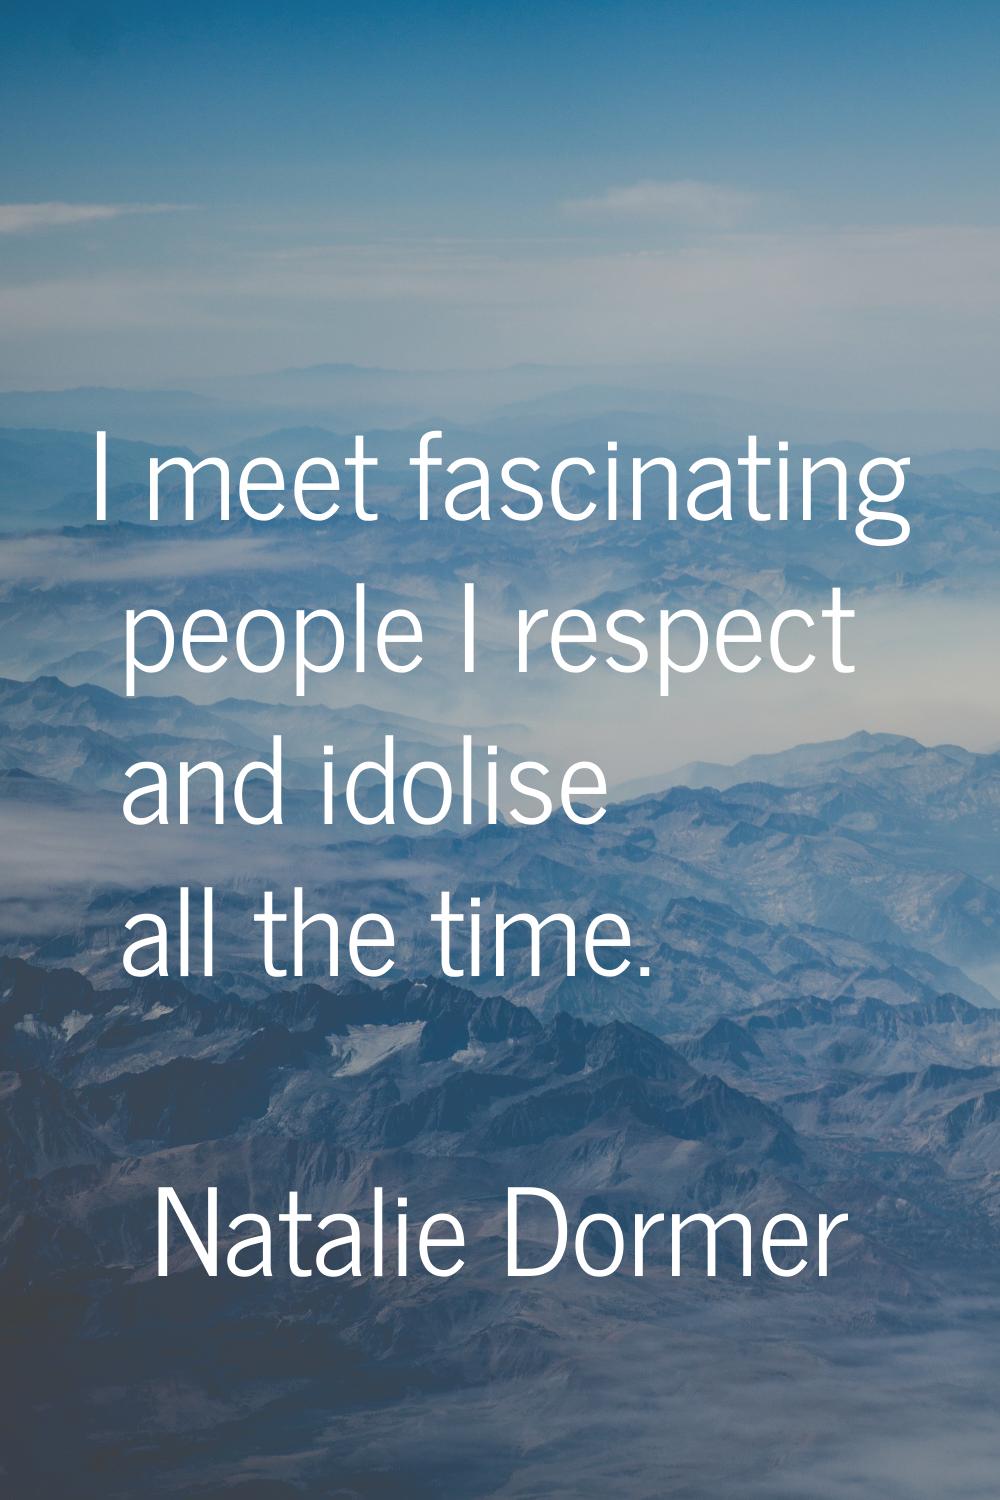 I meet fascinating people I respect and idolise all the time.